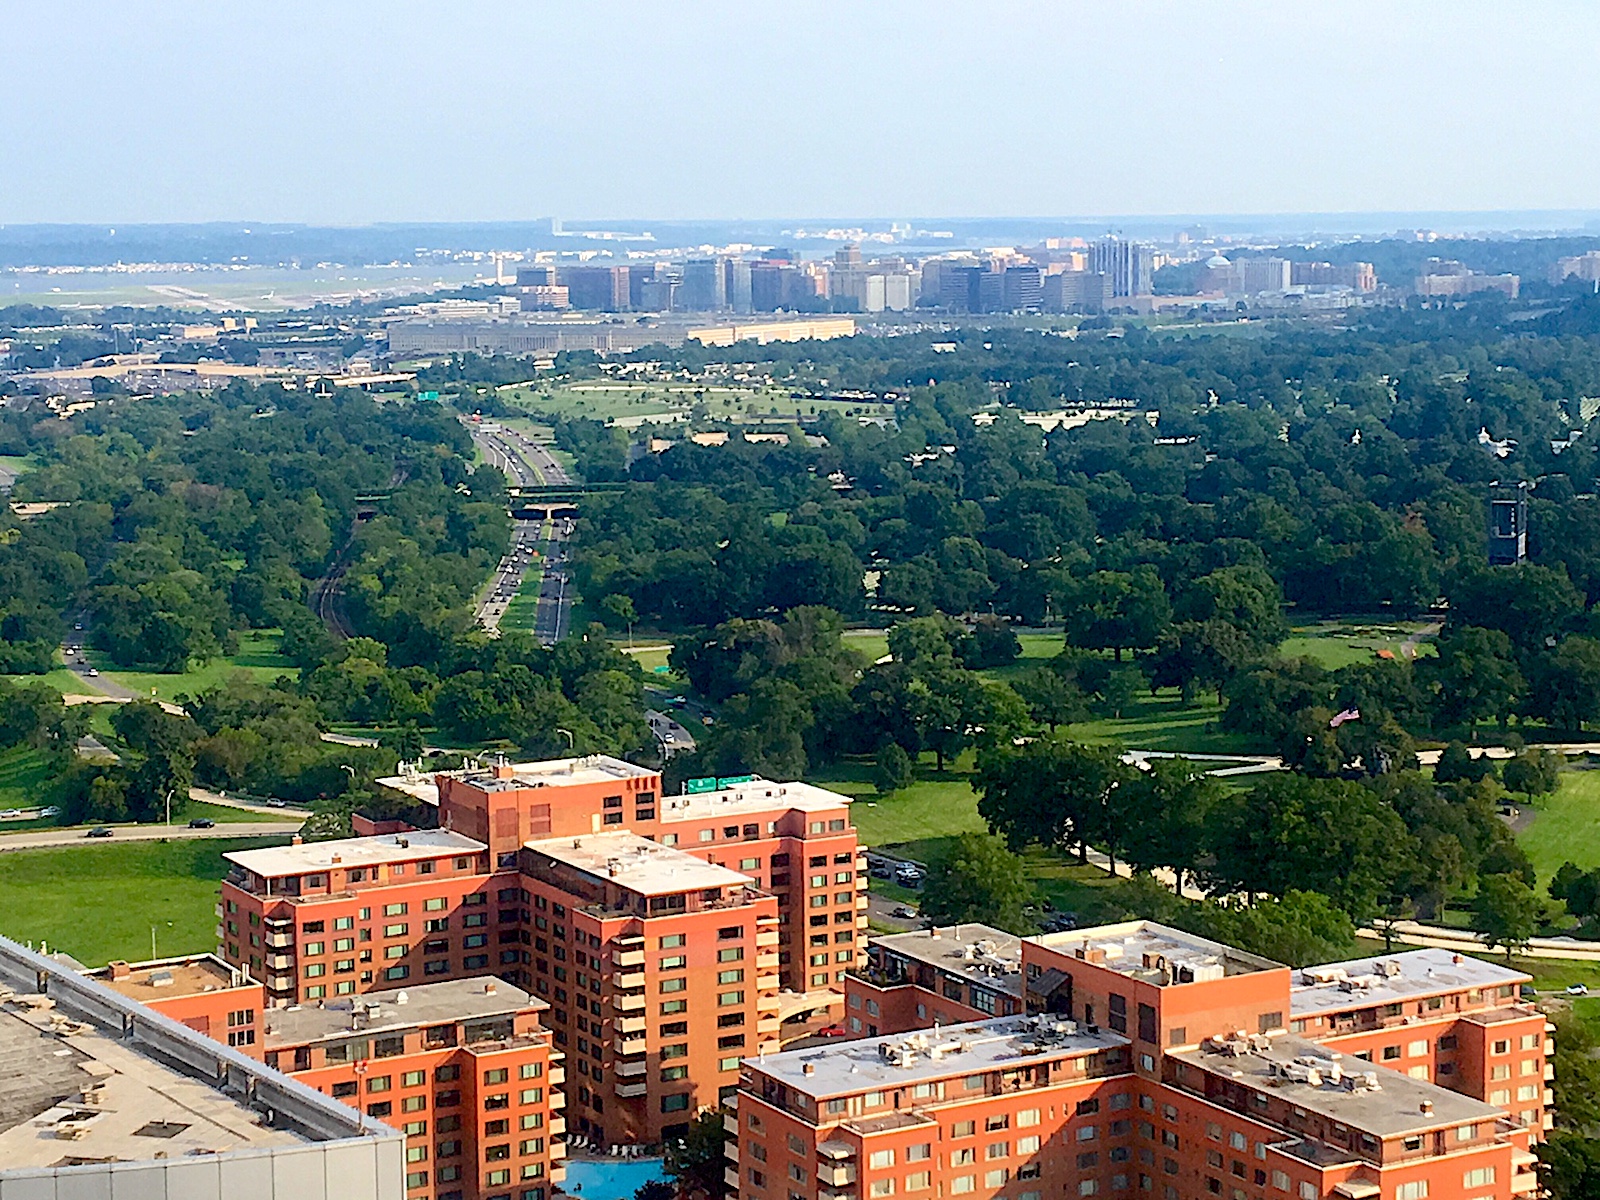 View of Arlington Cemetery, Crystal City, and Reagan National Airport